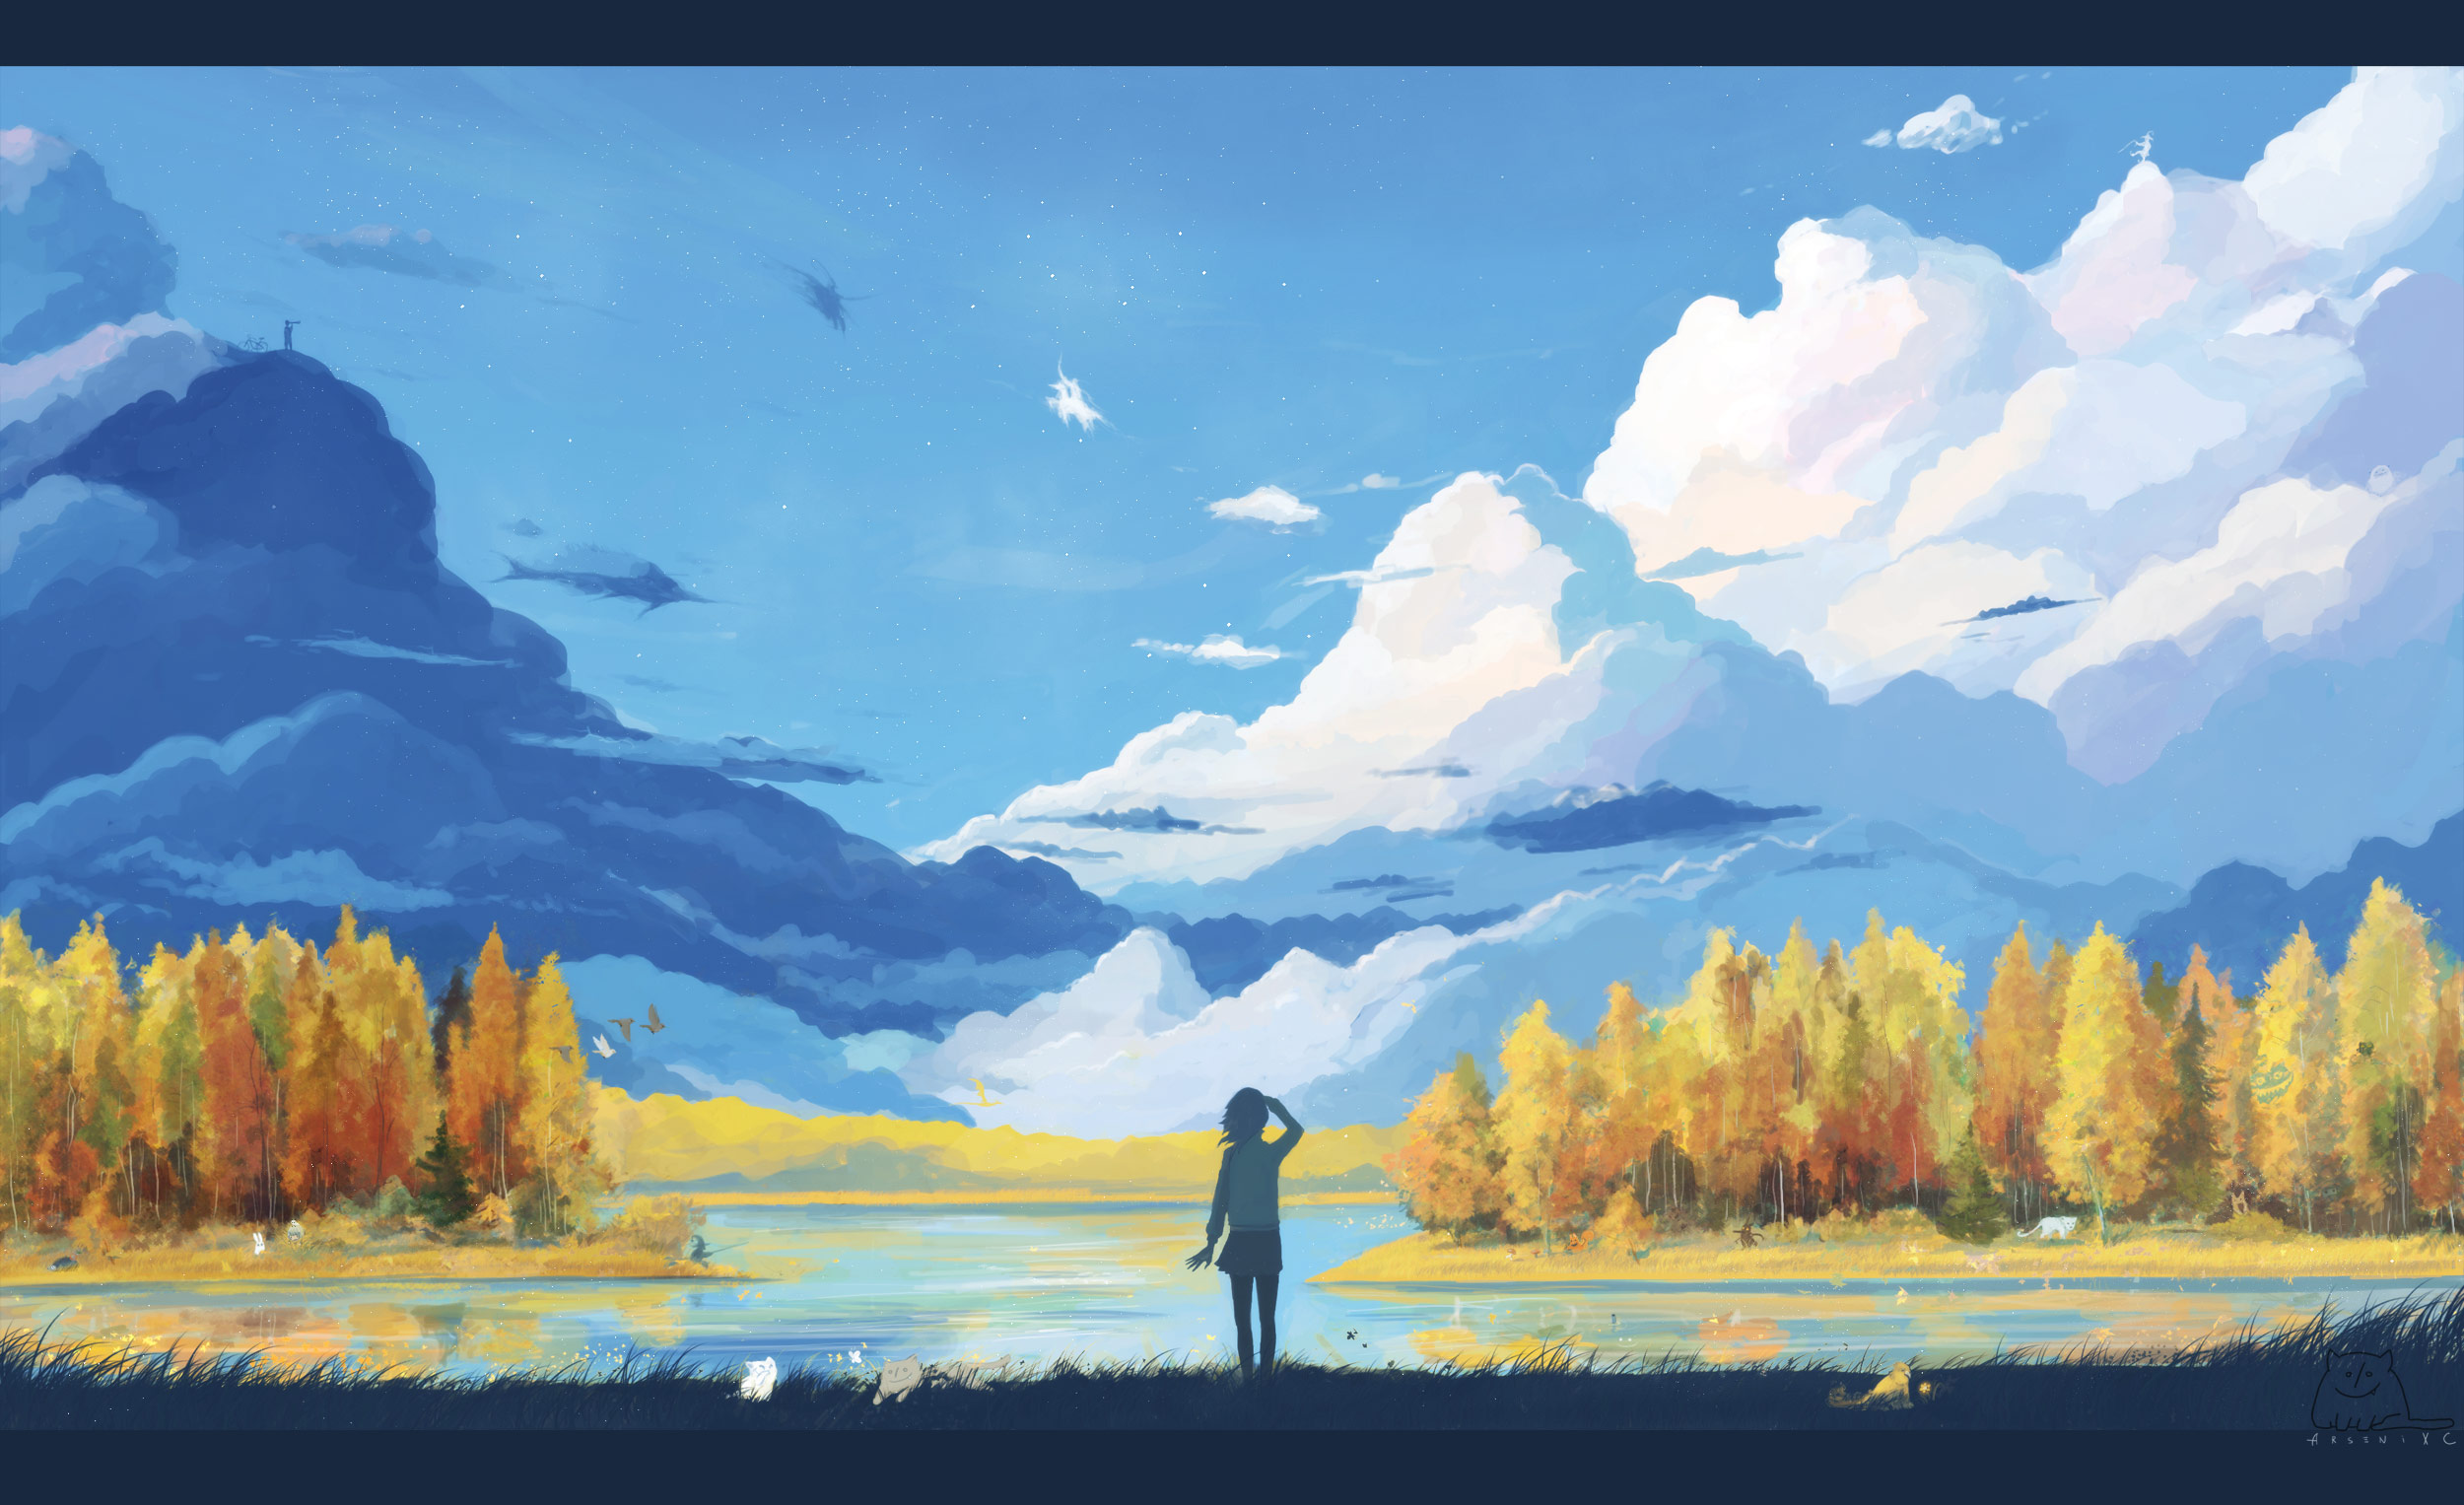 clouds, landscapes, trees, silhouettes, scenic, ArseniXC, original characters - desktop wallpaper